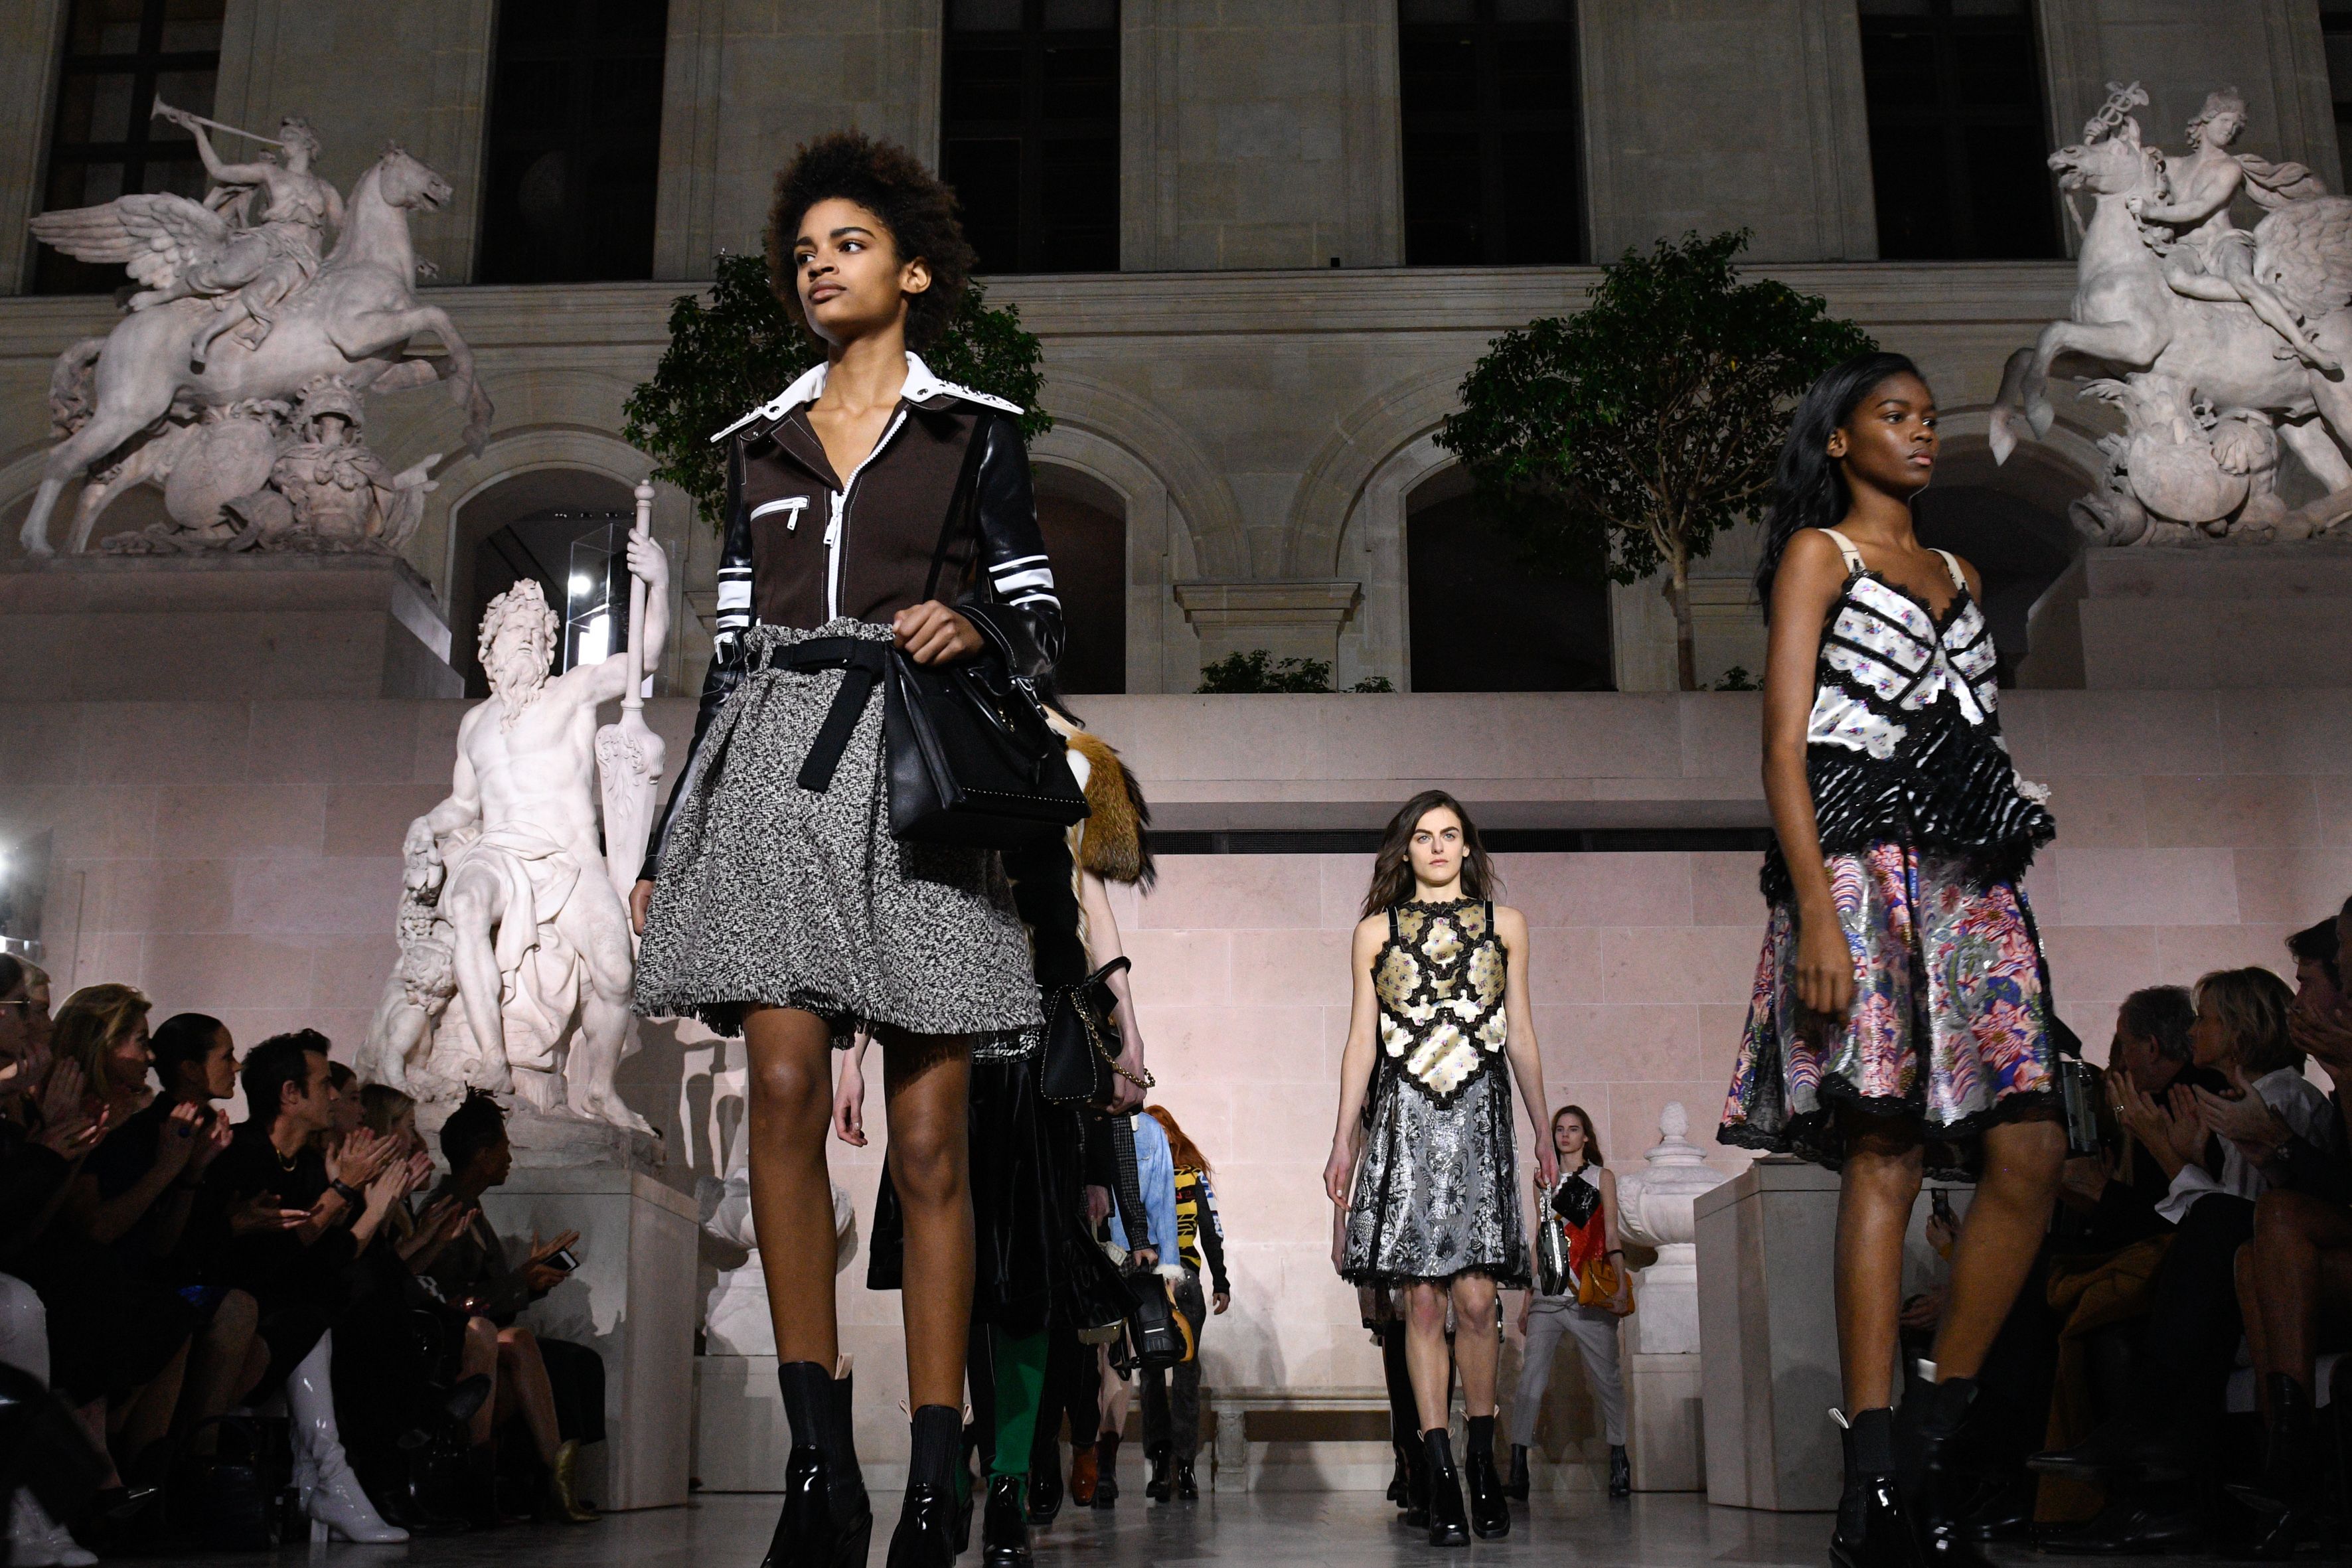 Louis Vuitton takes over the Louvre at Paris Fashion Week: watch it live